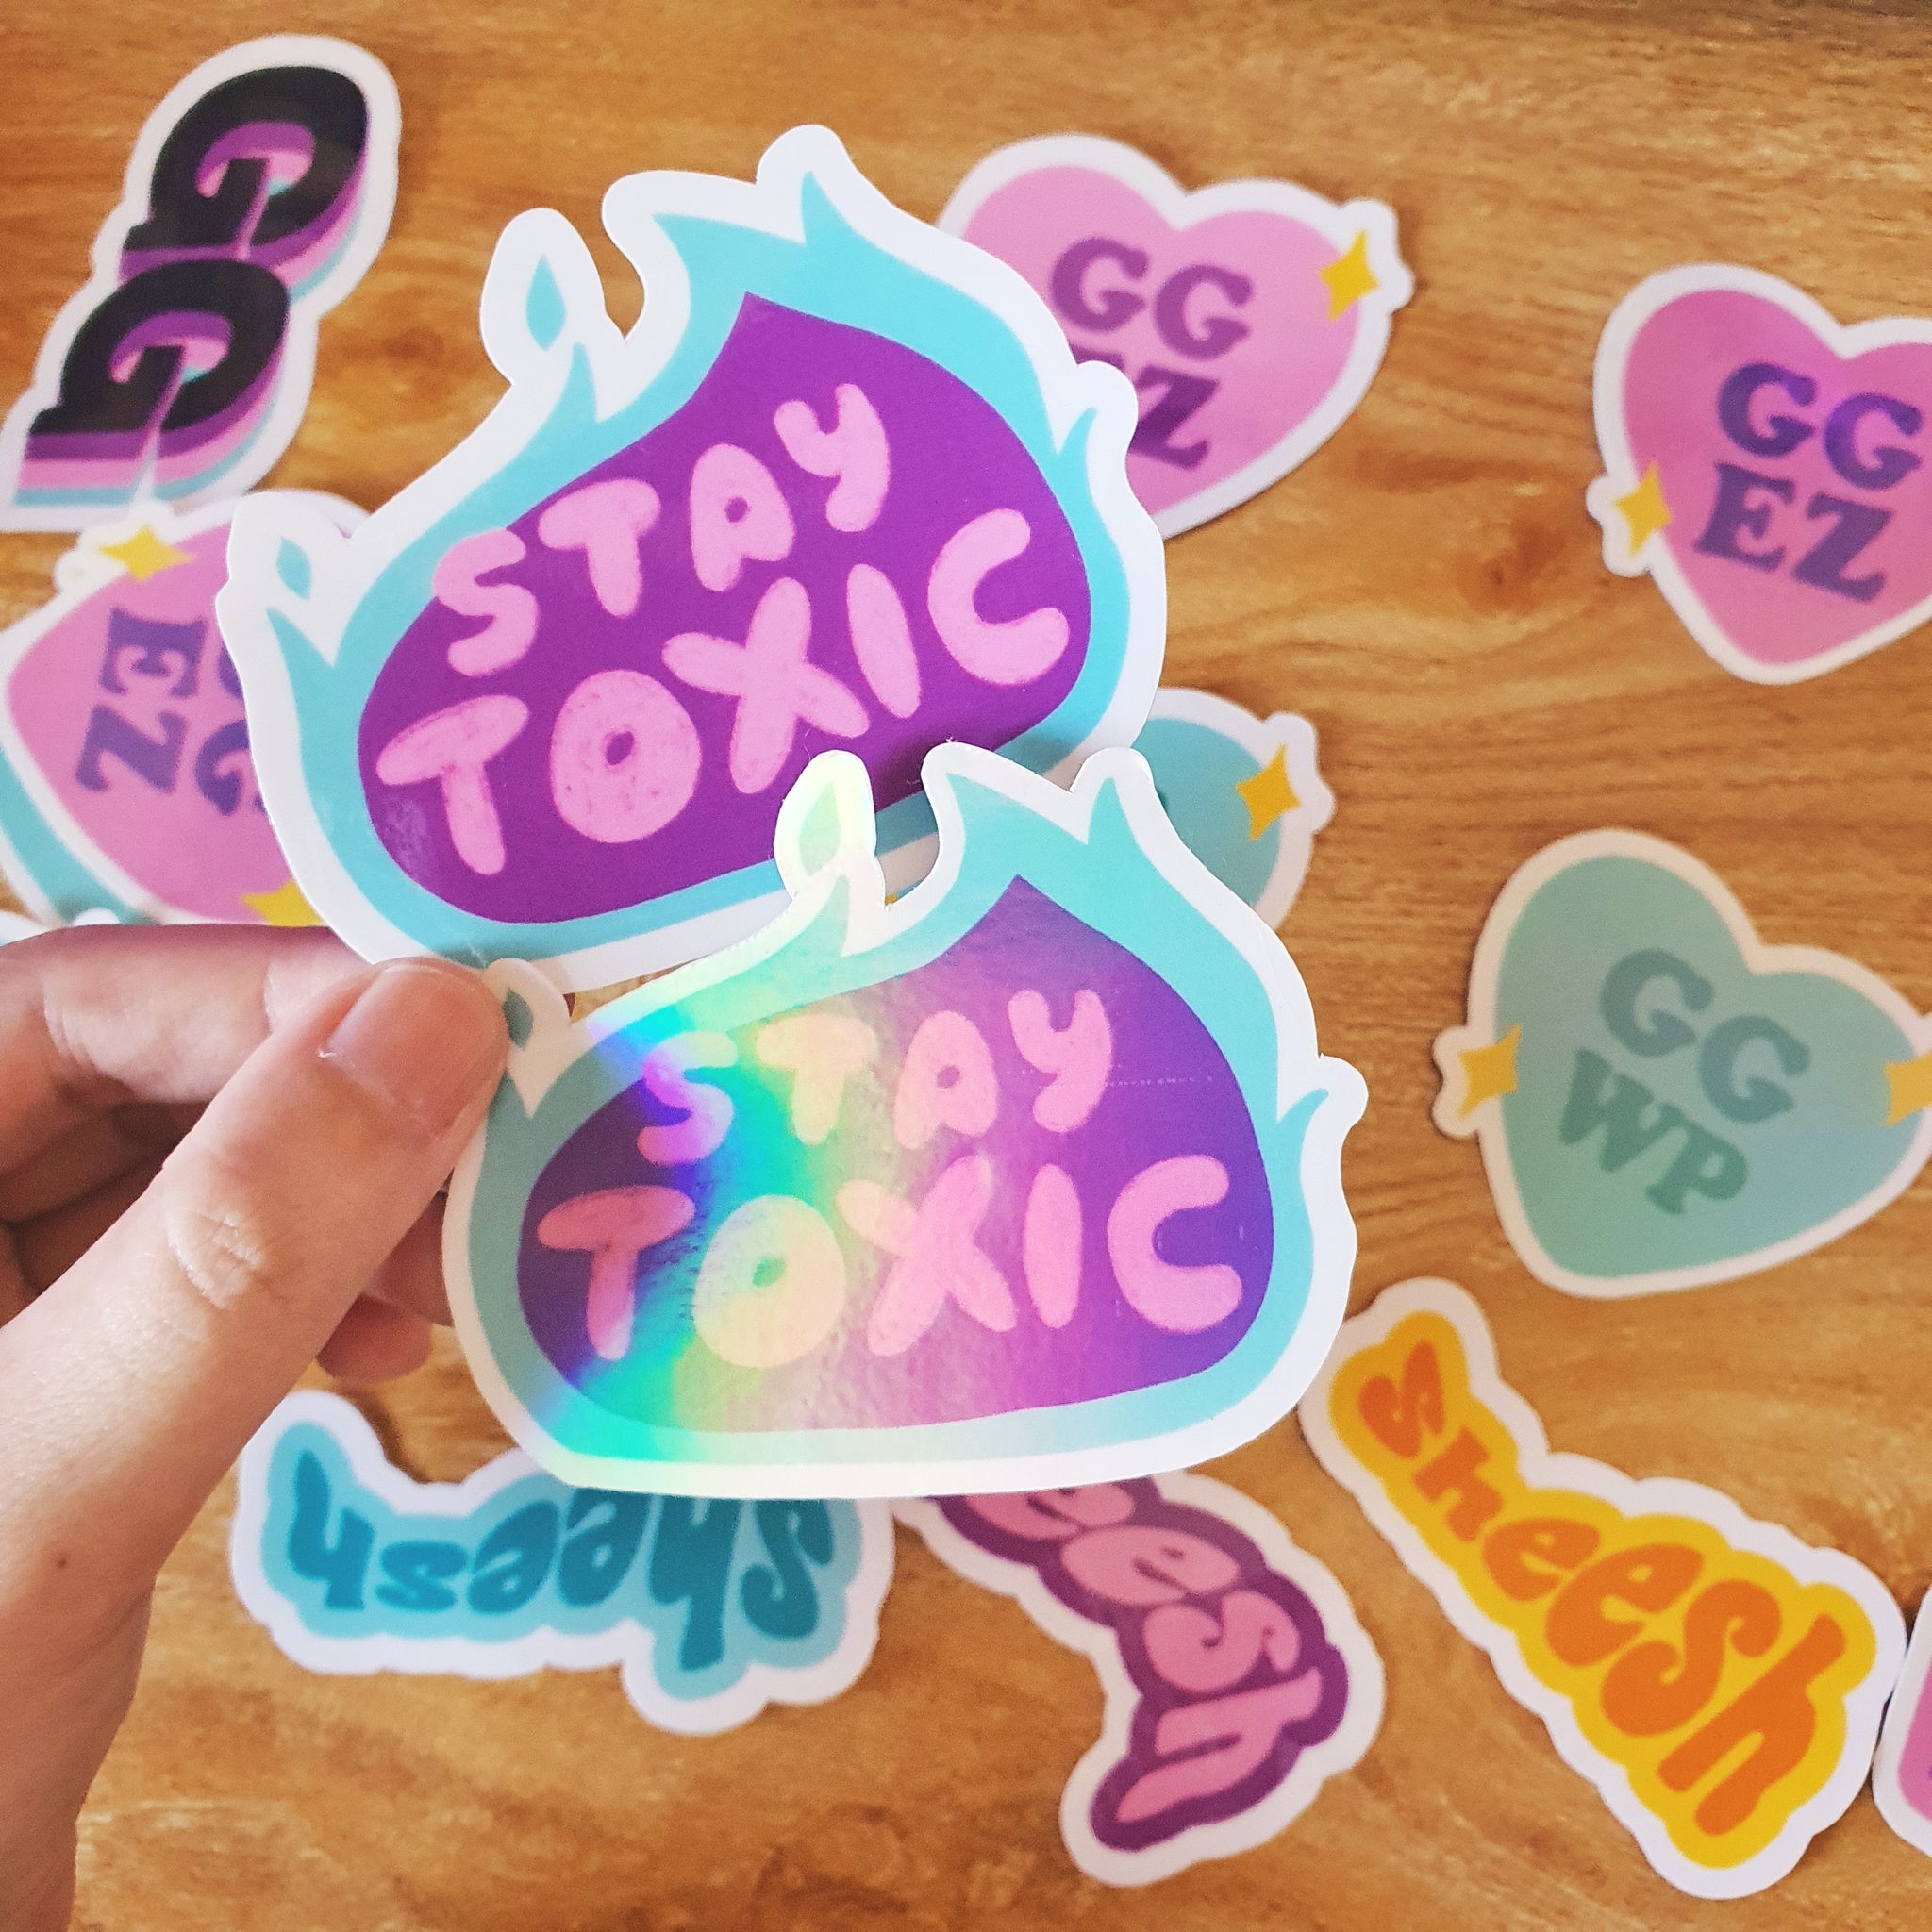 Gg Wp Stickers for Sale